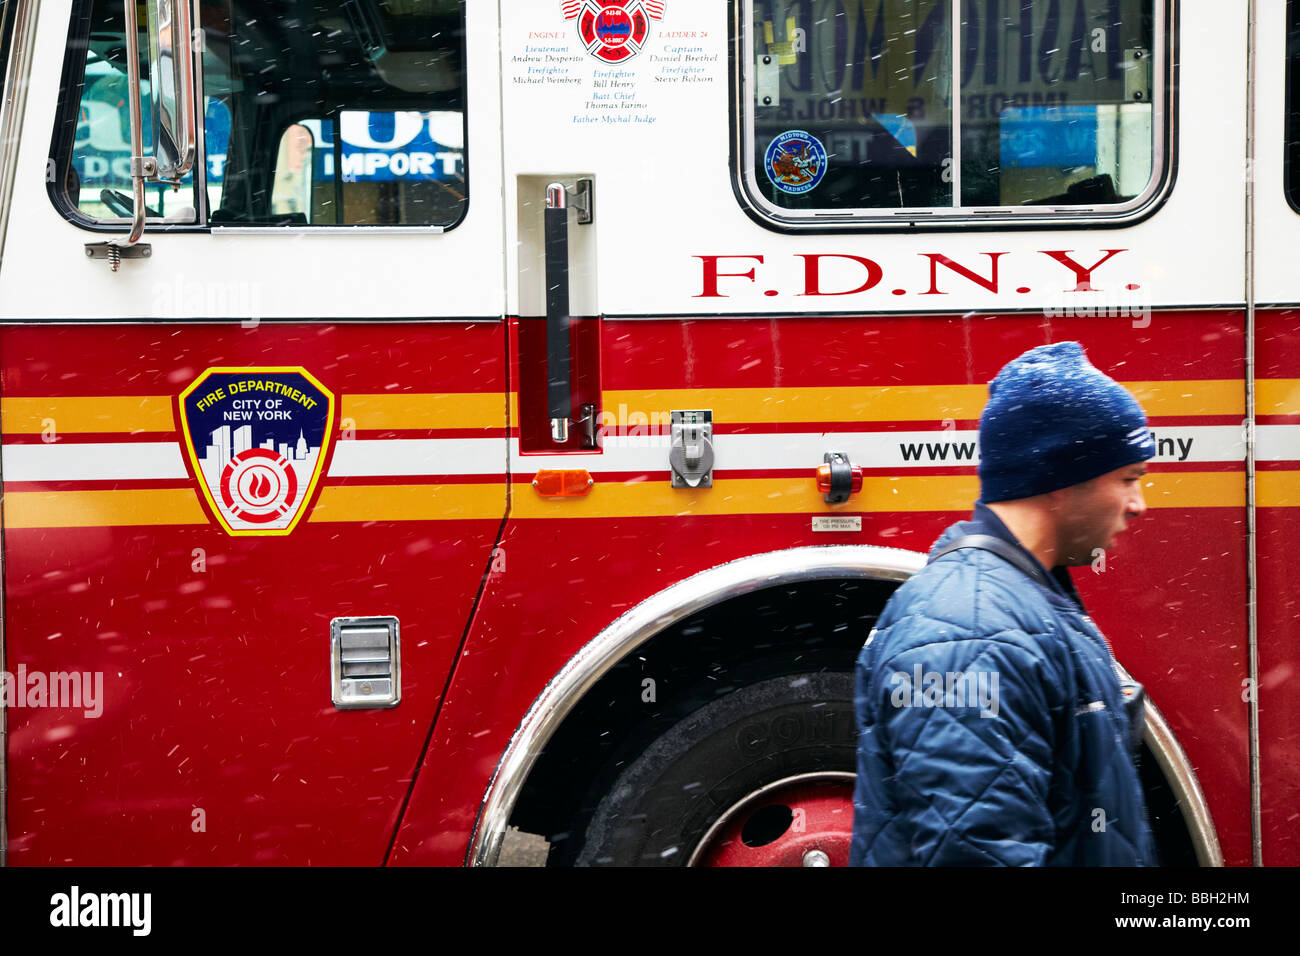 fire Engine, fire engine, FDNY Stock Photo